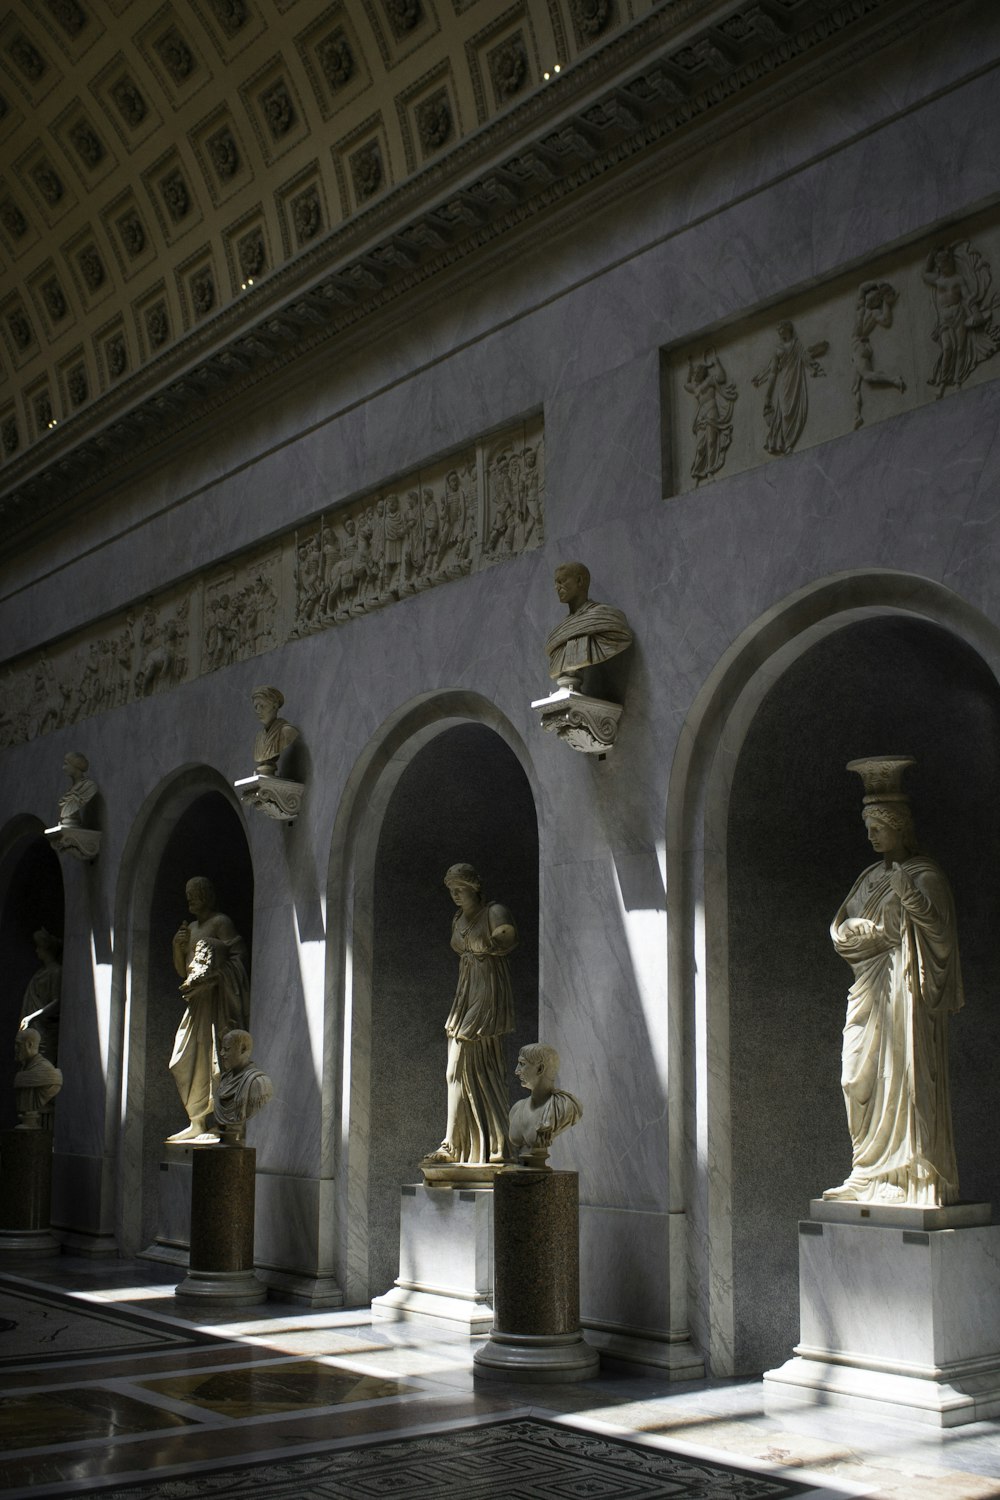 a group of statues in a room with arches